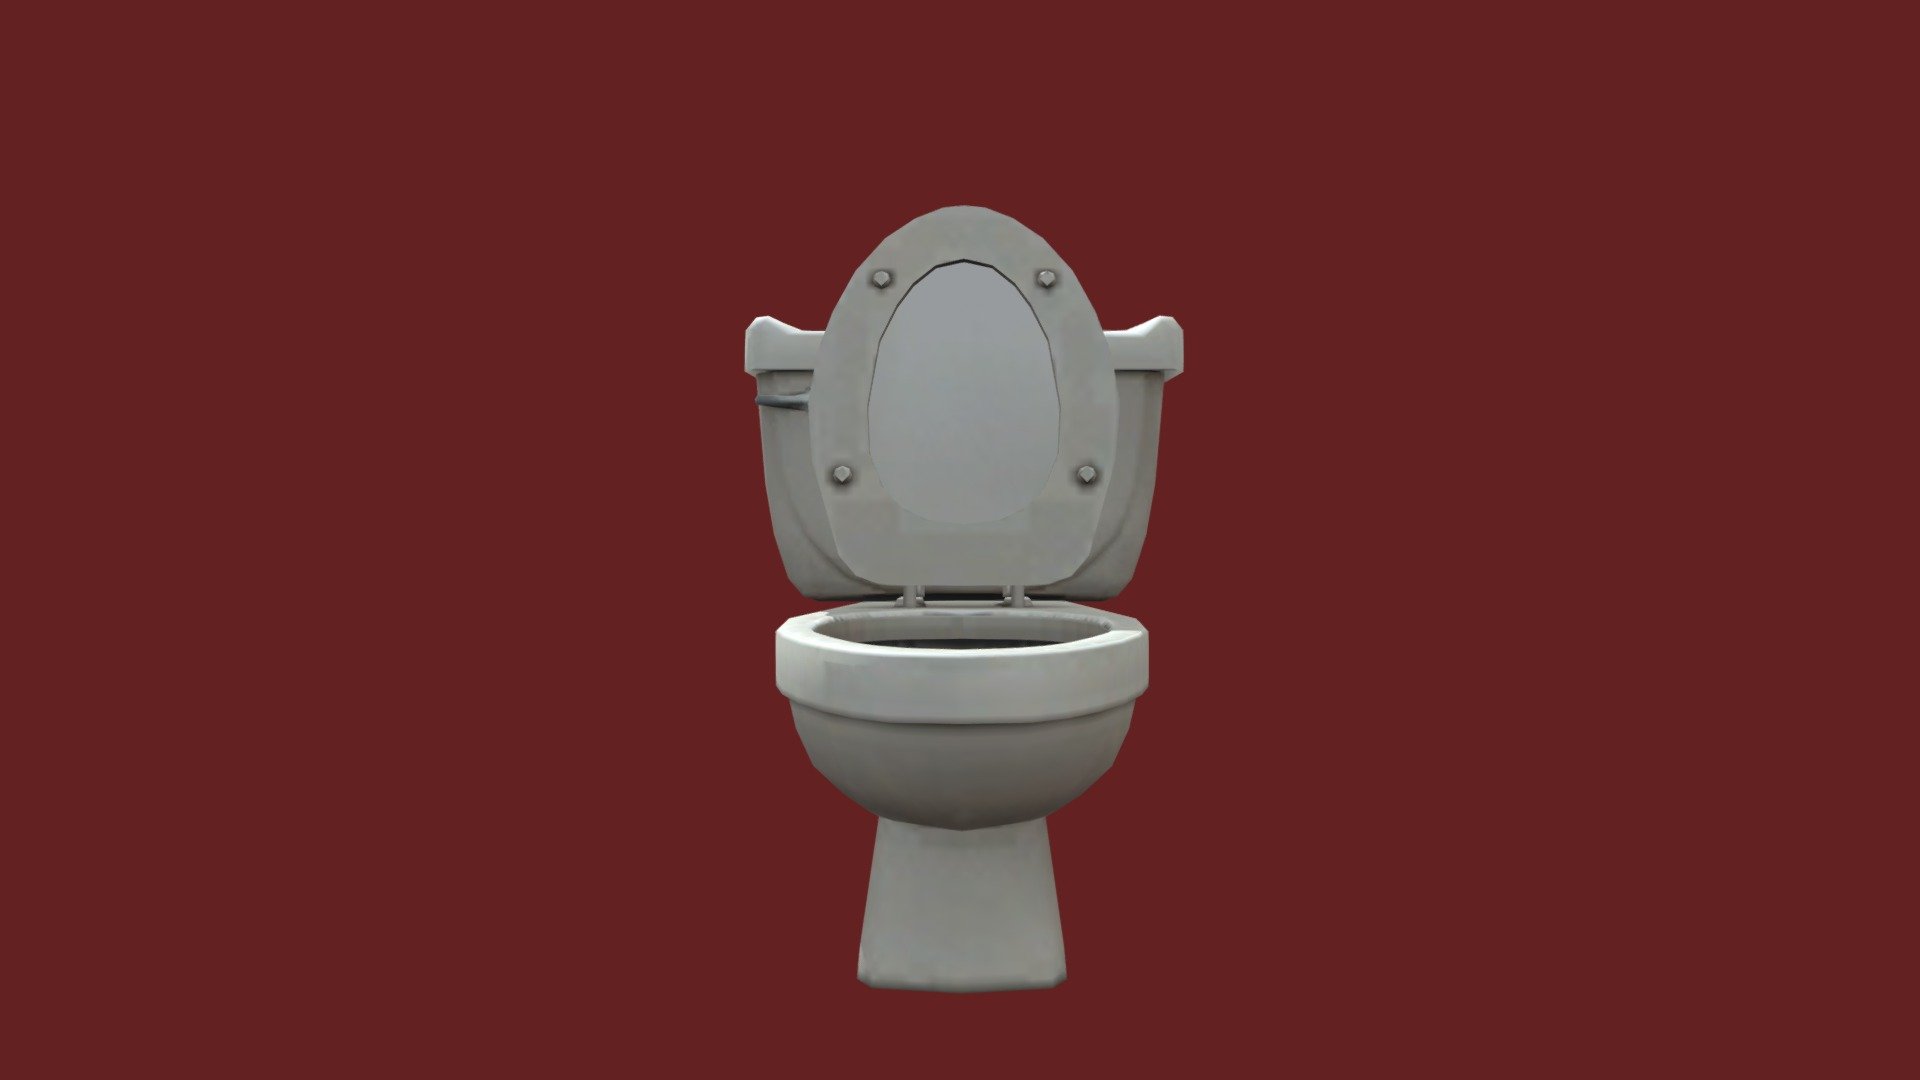 credits to pamm (@daeboommmm)

haha no download for you 😈 - skibidi toilet model 2 - 3D model by Lil Baby (@imlilbaby2) 3d model